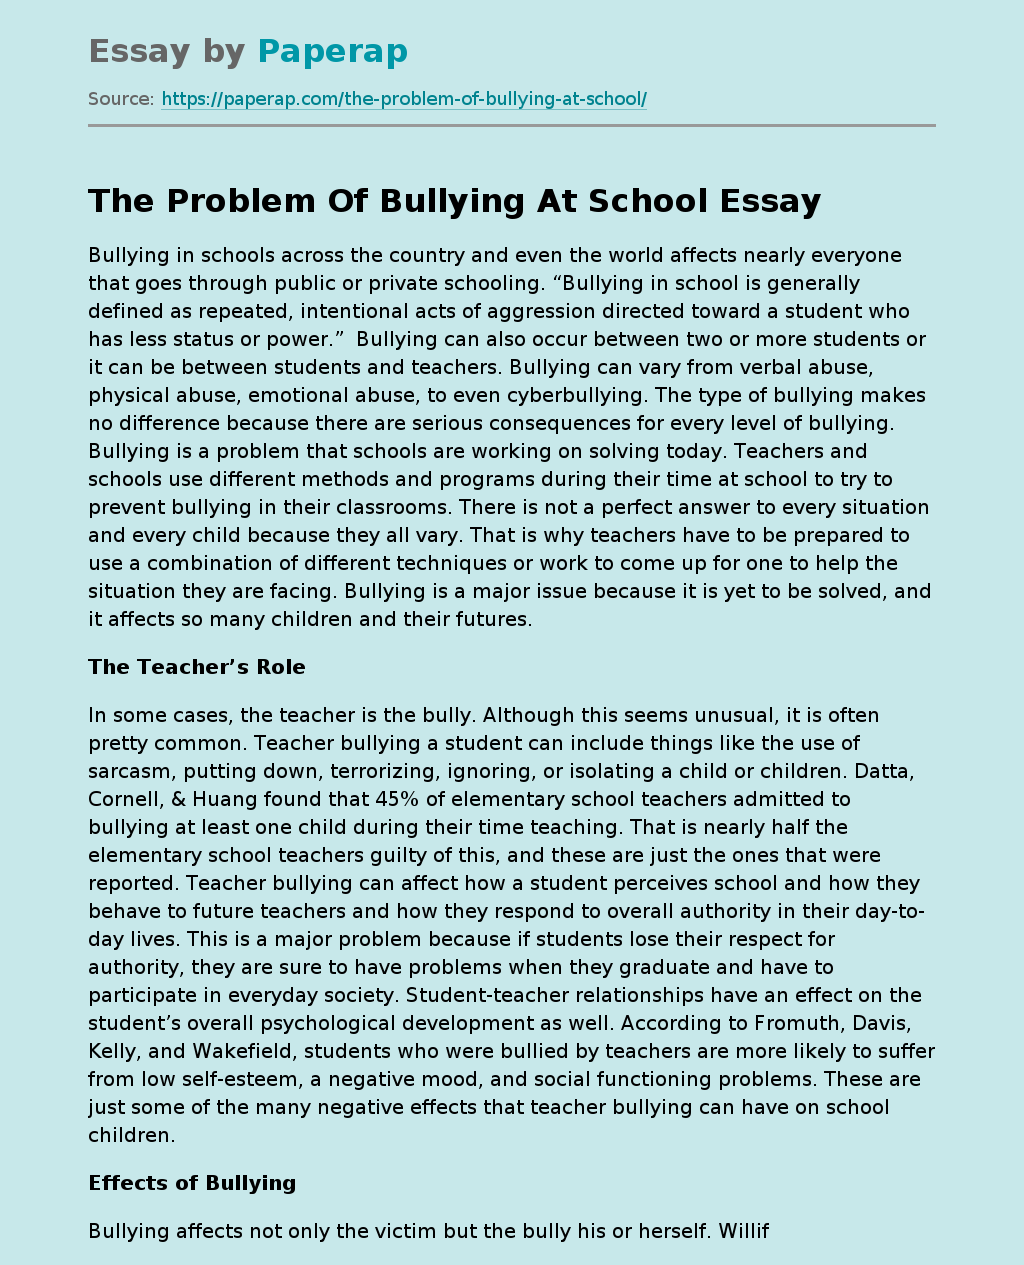 The Problem Of Bullying At School